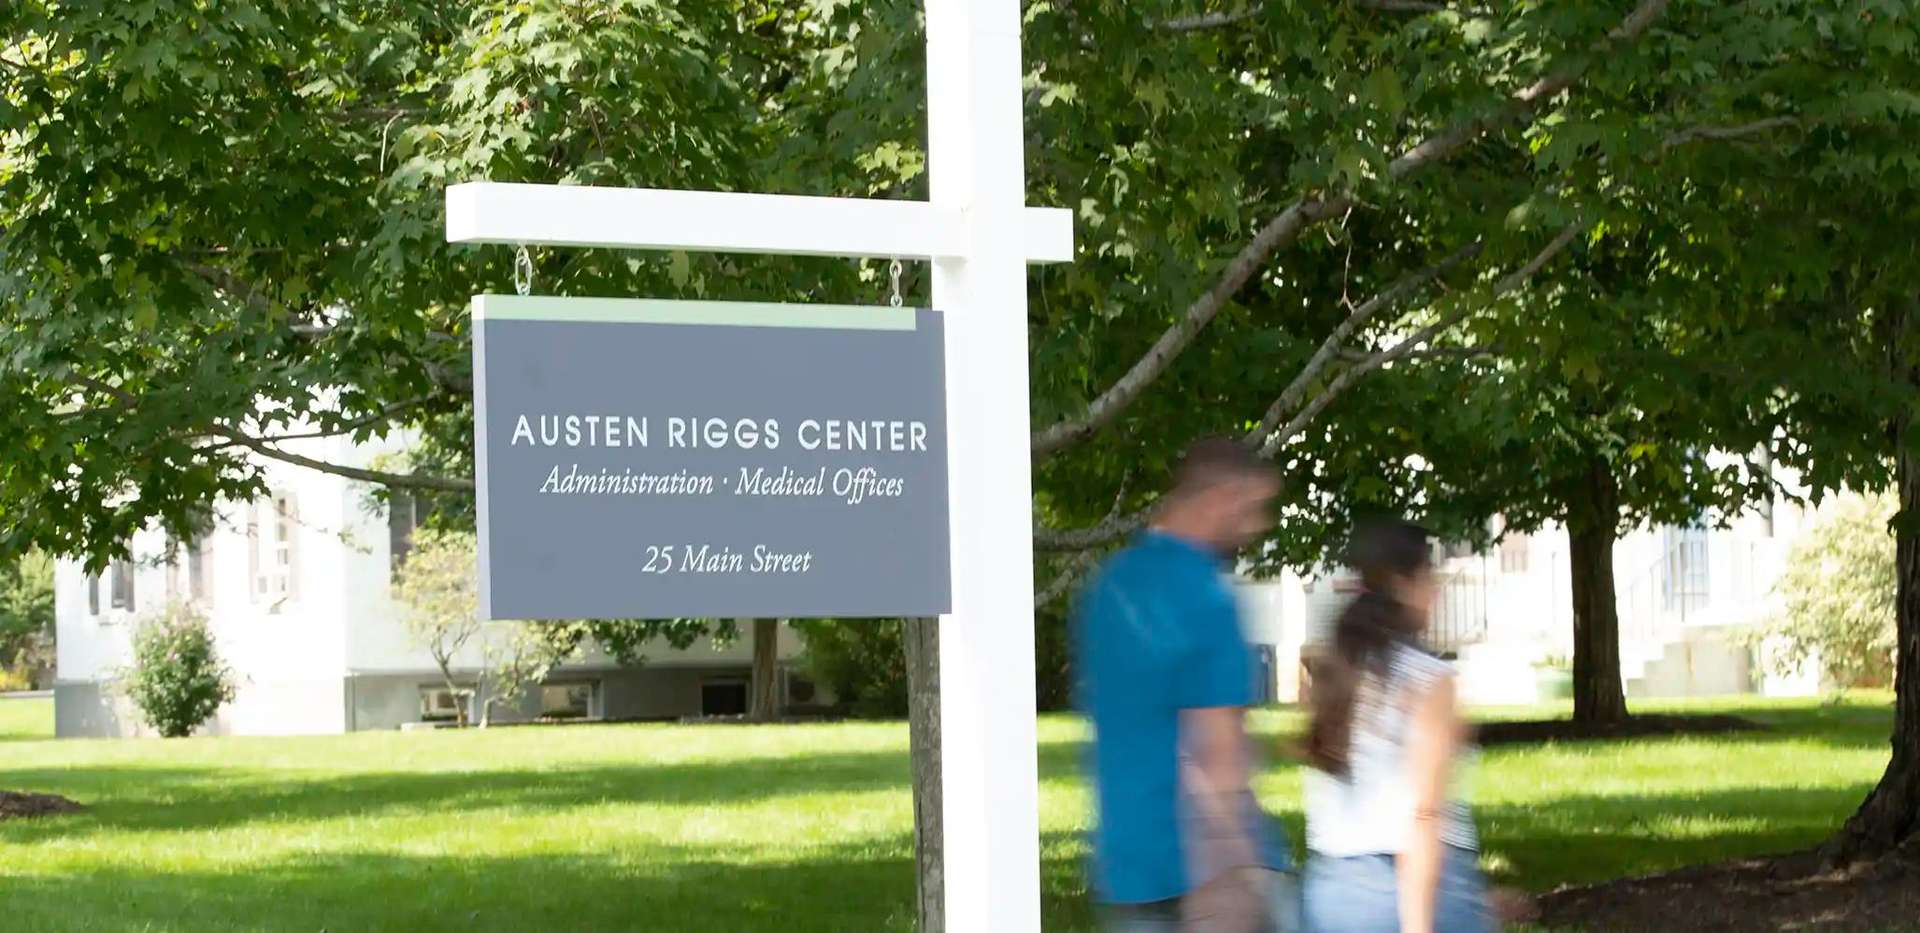 Sign for Austen Riggs Center administration and medical offices at 25 Main Street in Stockbridge, Massachusetts